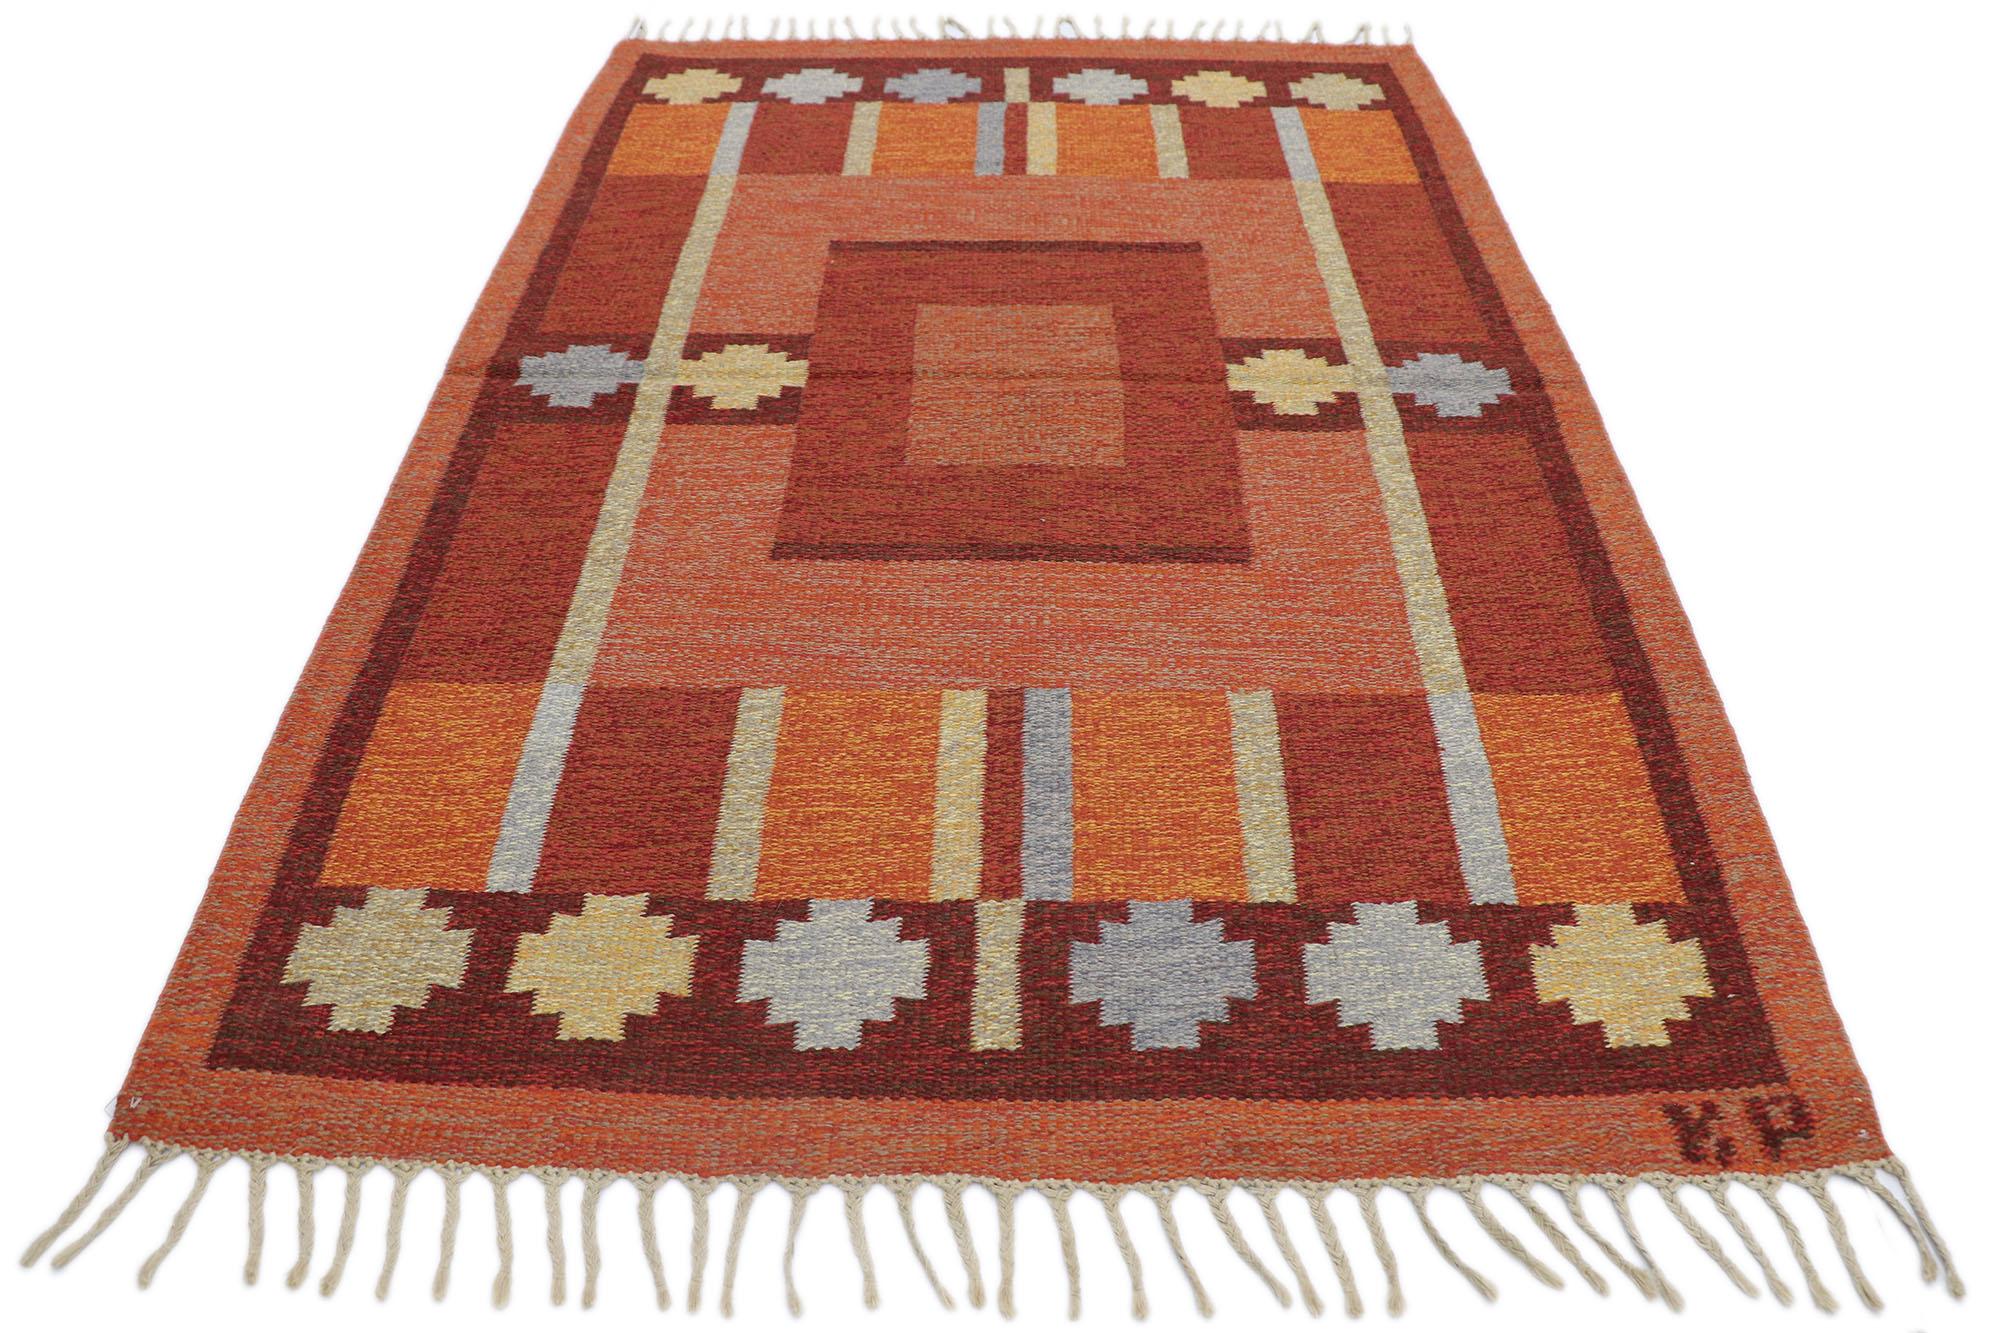 20th Century Vintage Swedish Kilim Rug with Scandinavian Modern Style by Kerstin Persson  For Sale